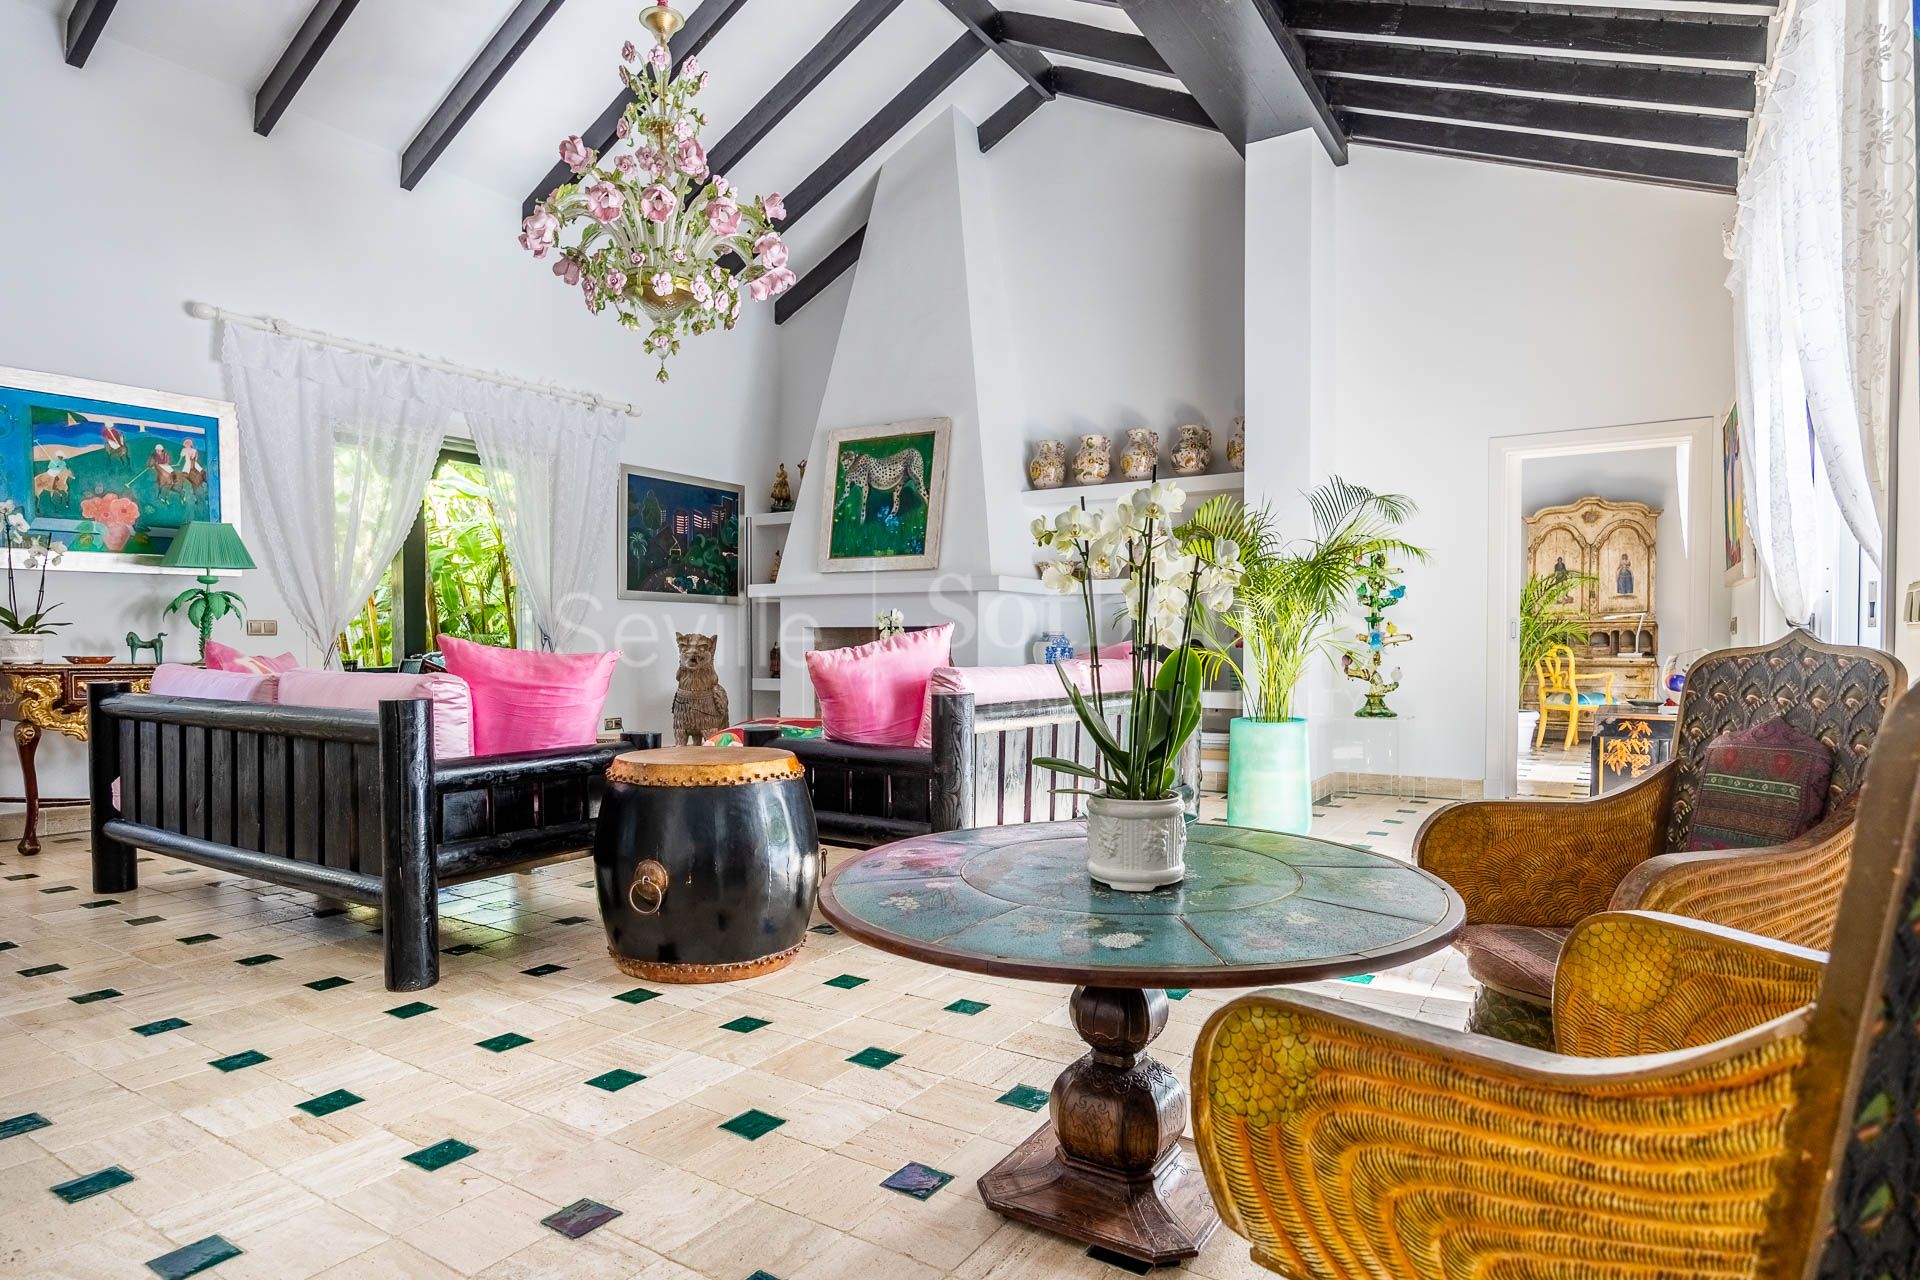 Seafront mansion on Marbella's Golden Mile with guest house and direct access to the beach